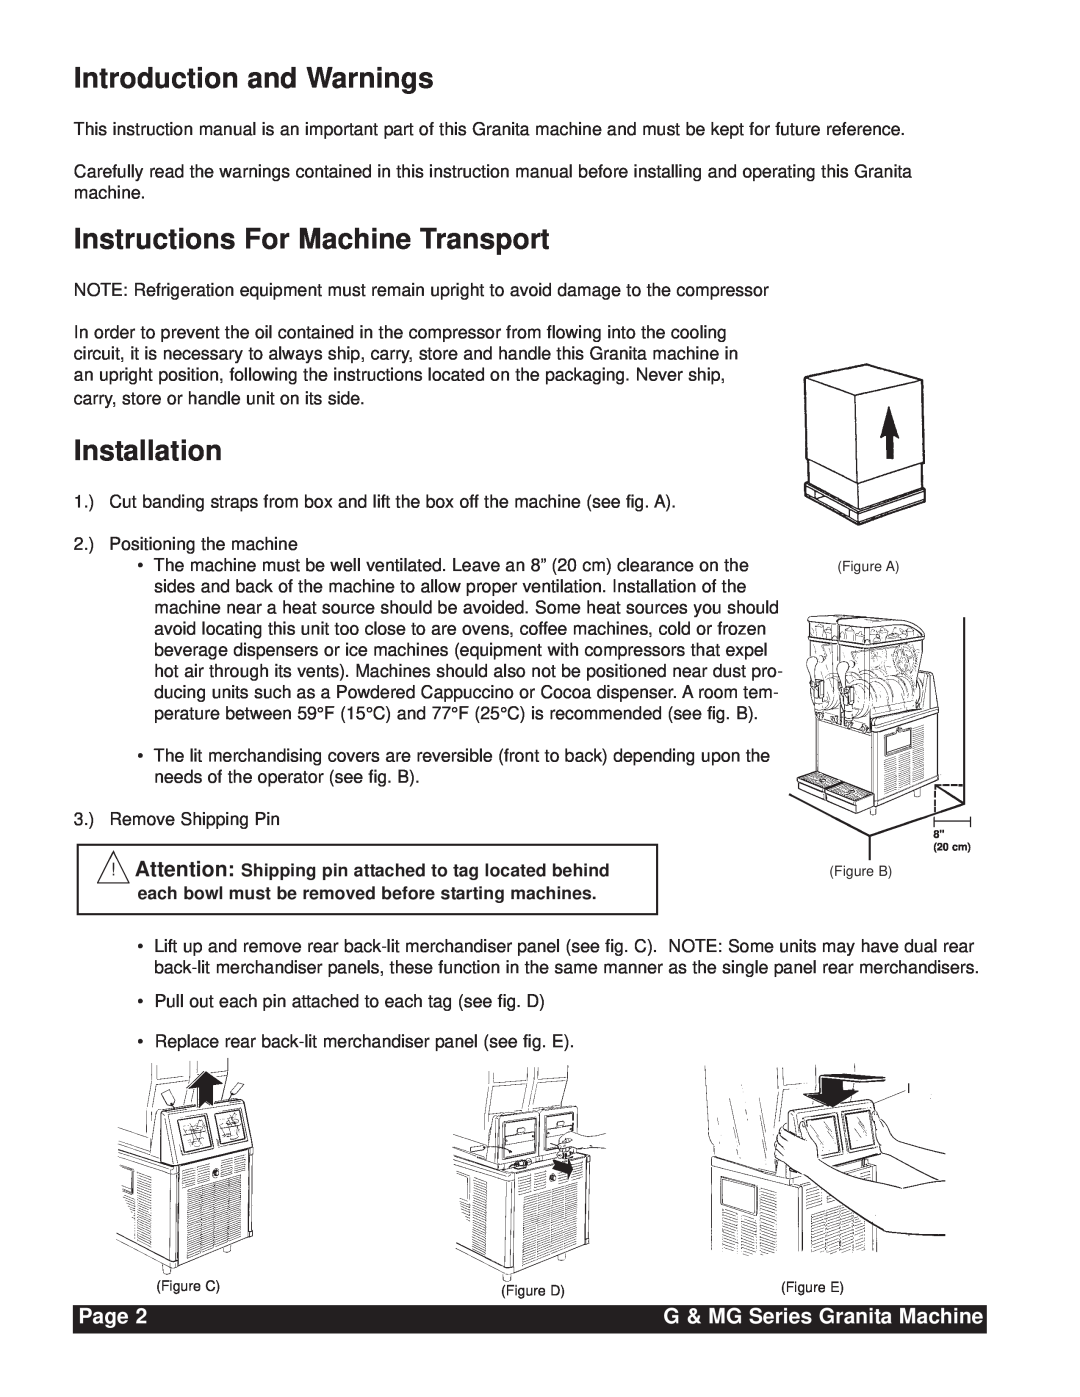 Grindmaster G & MG Series Introduction and Warnings, Instructions For Machine Transport, Installation, Page 